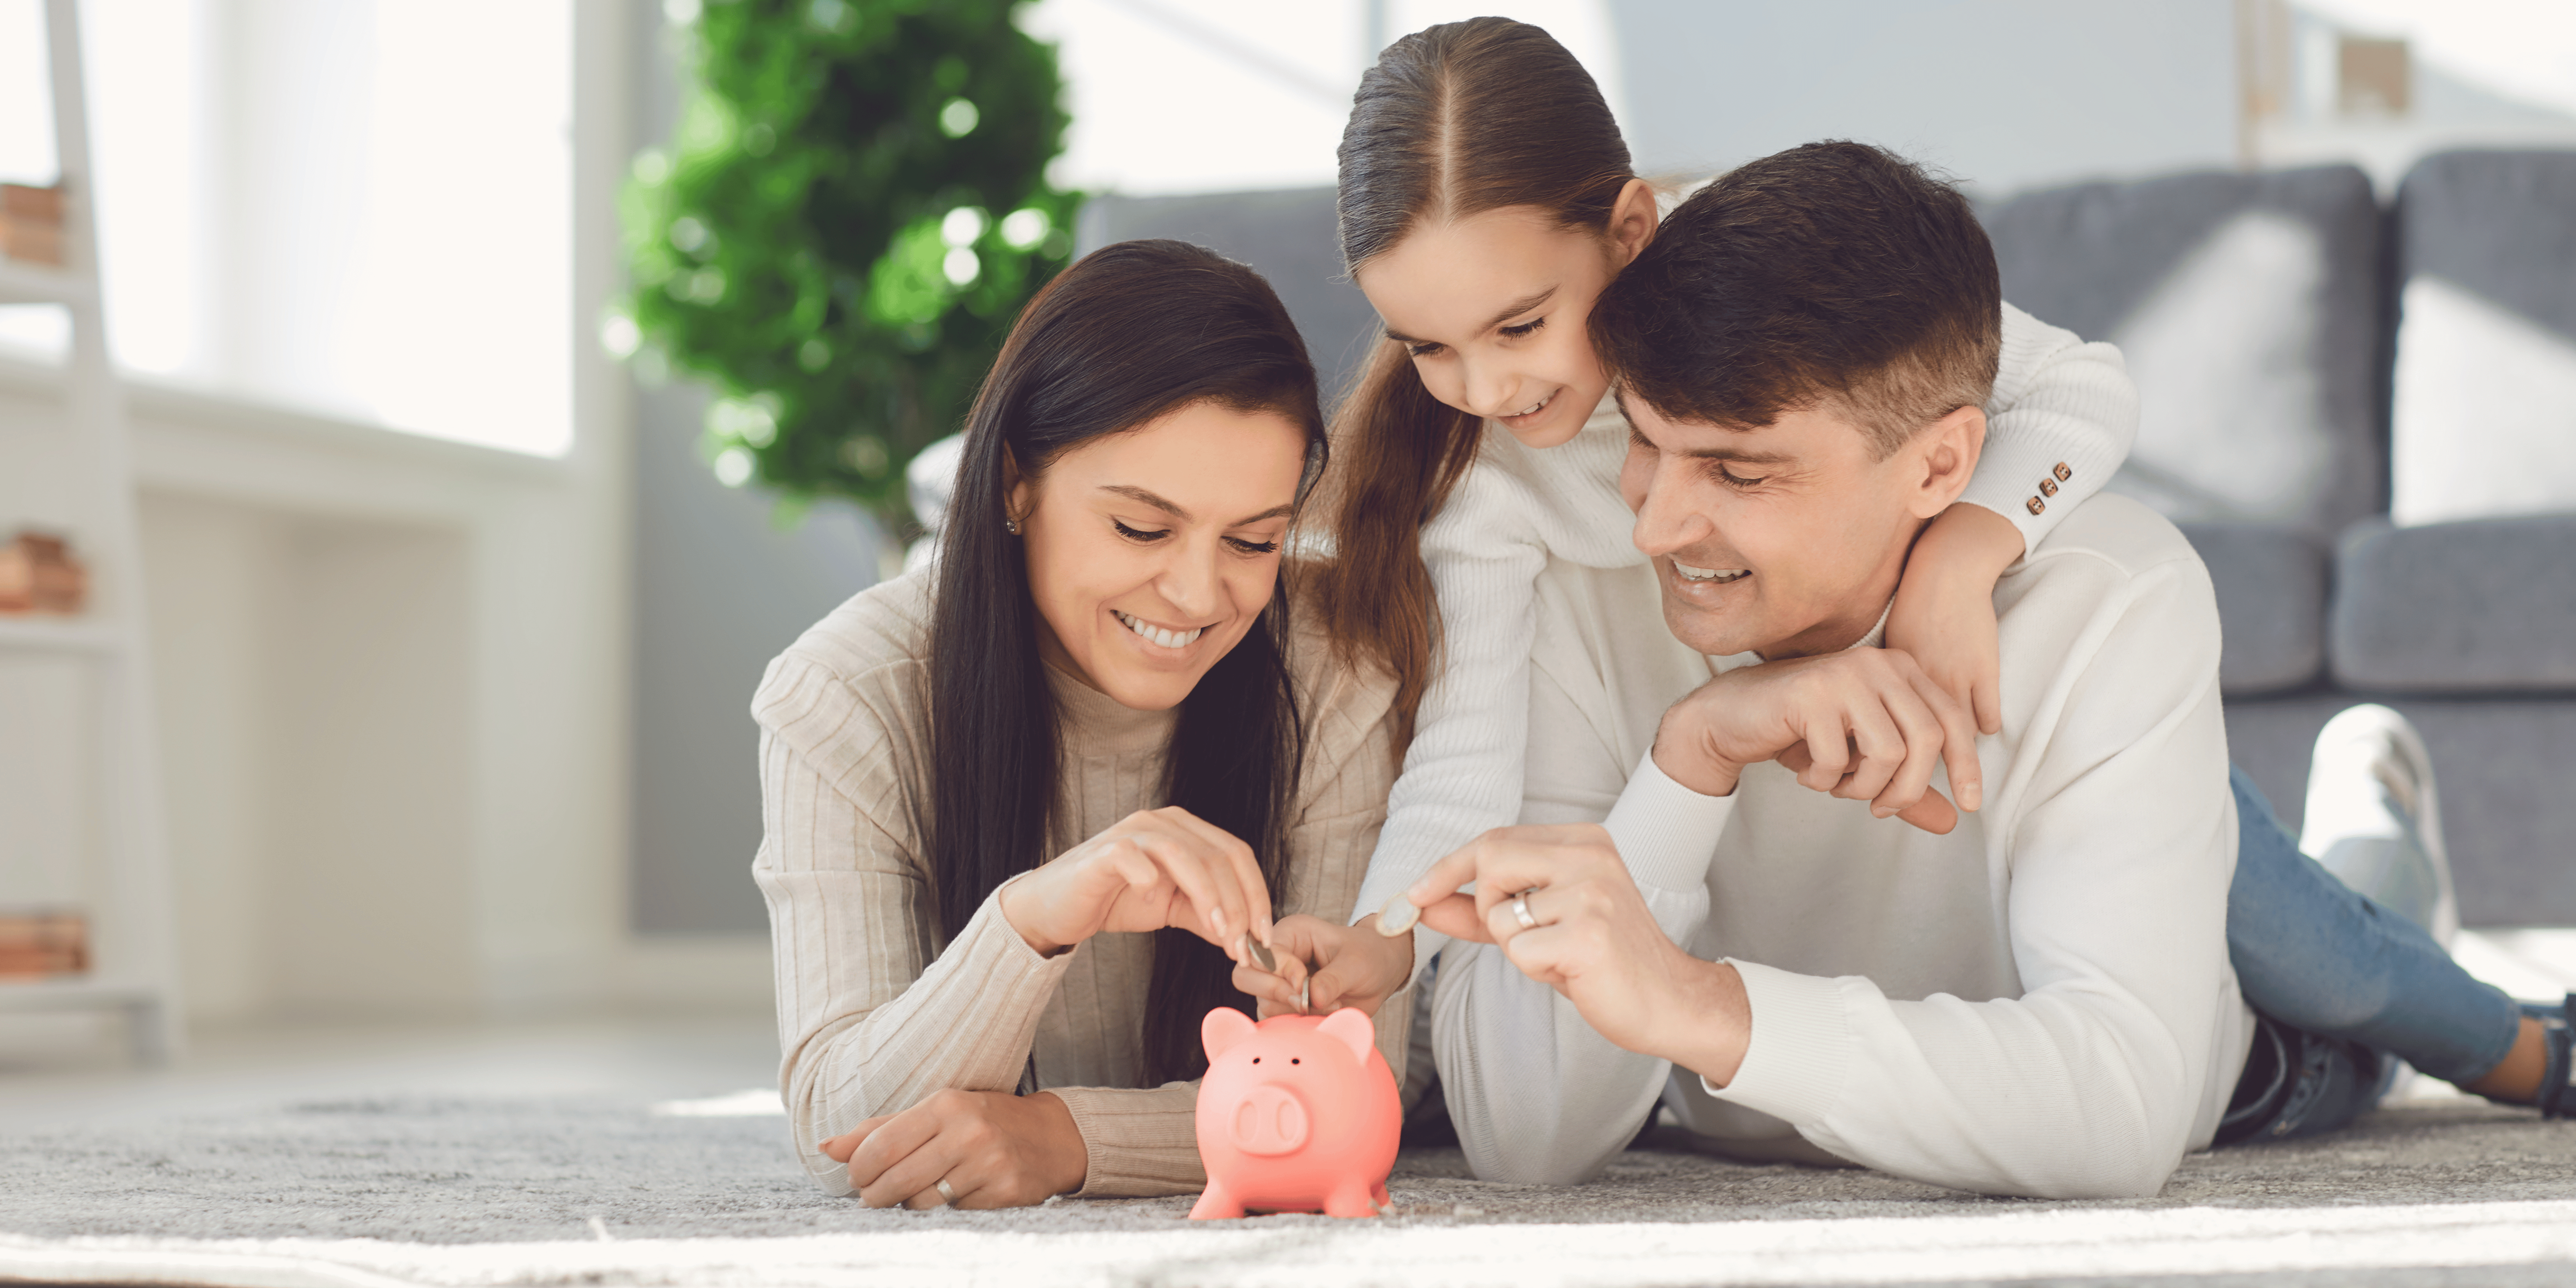 Family putting money in piggy bank